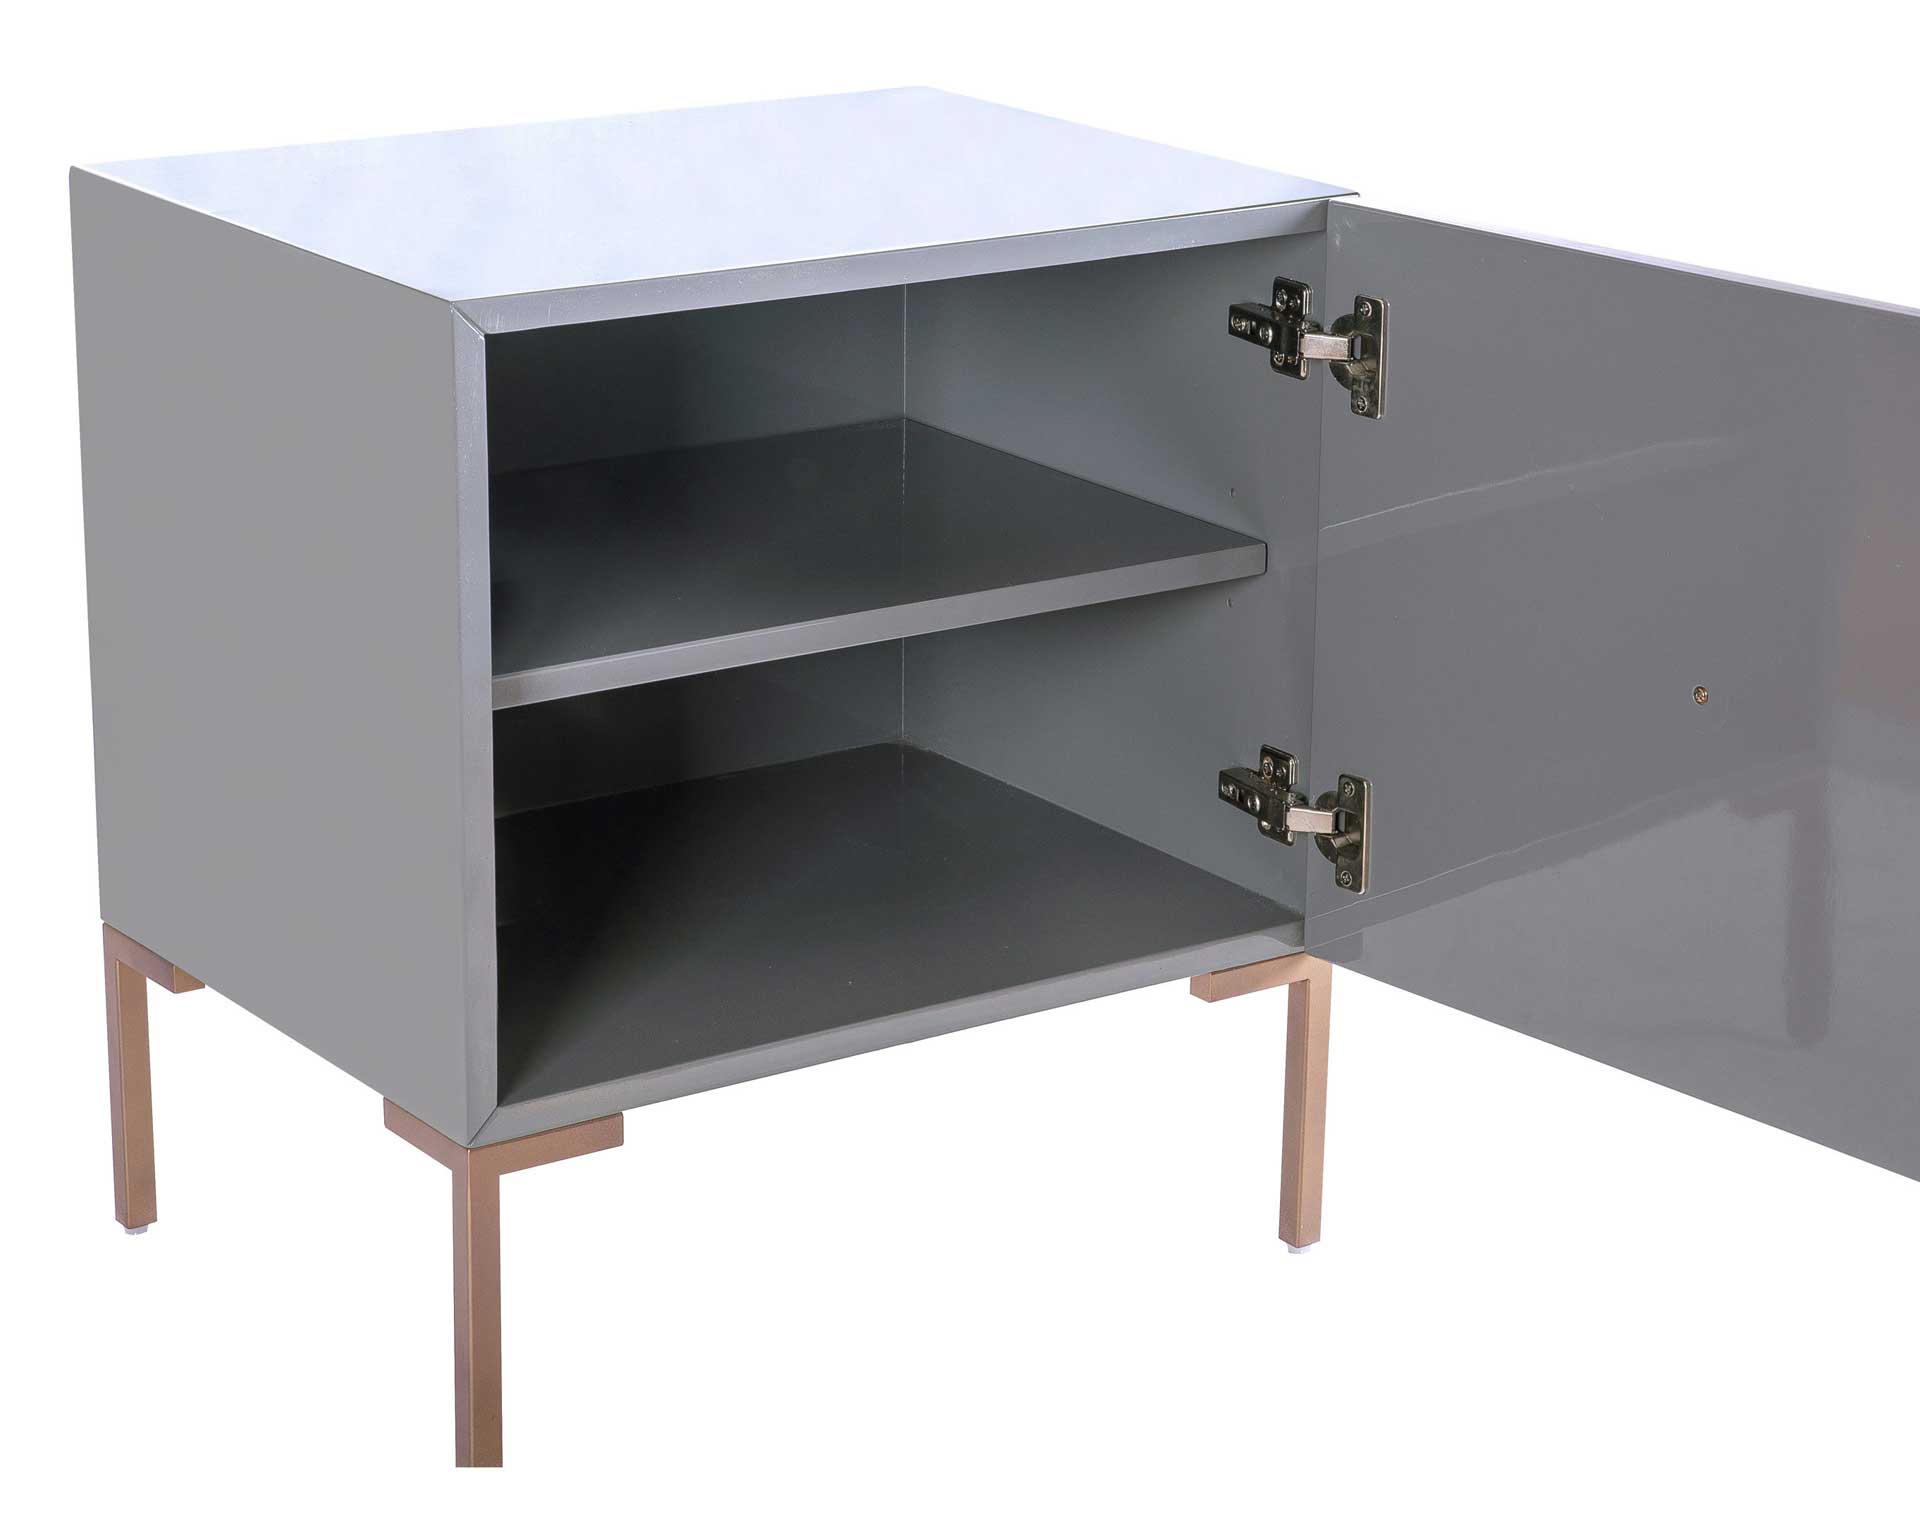 Analiz Lacquer Side Table Gray